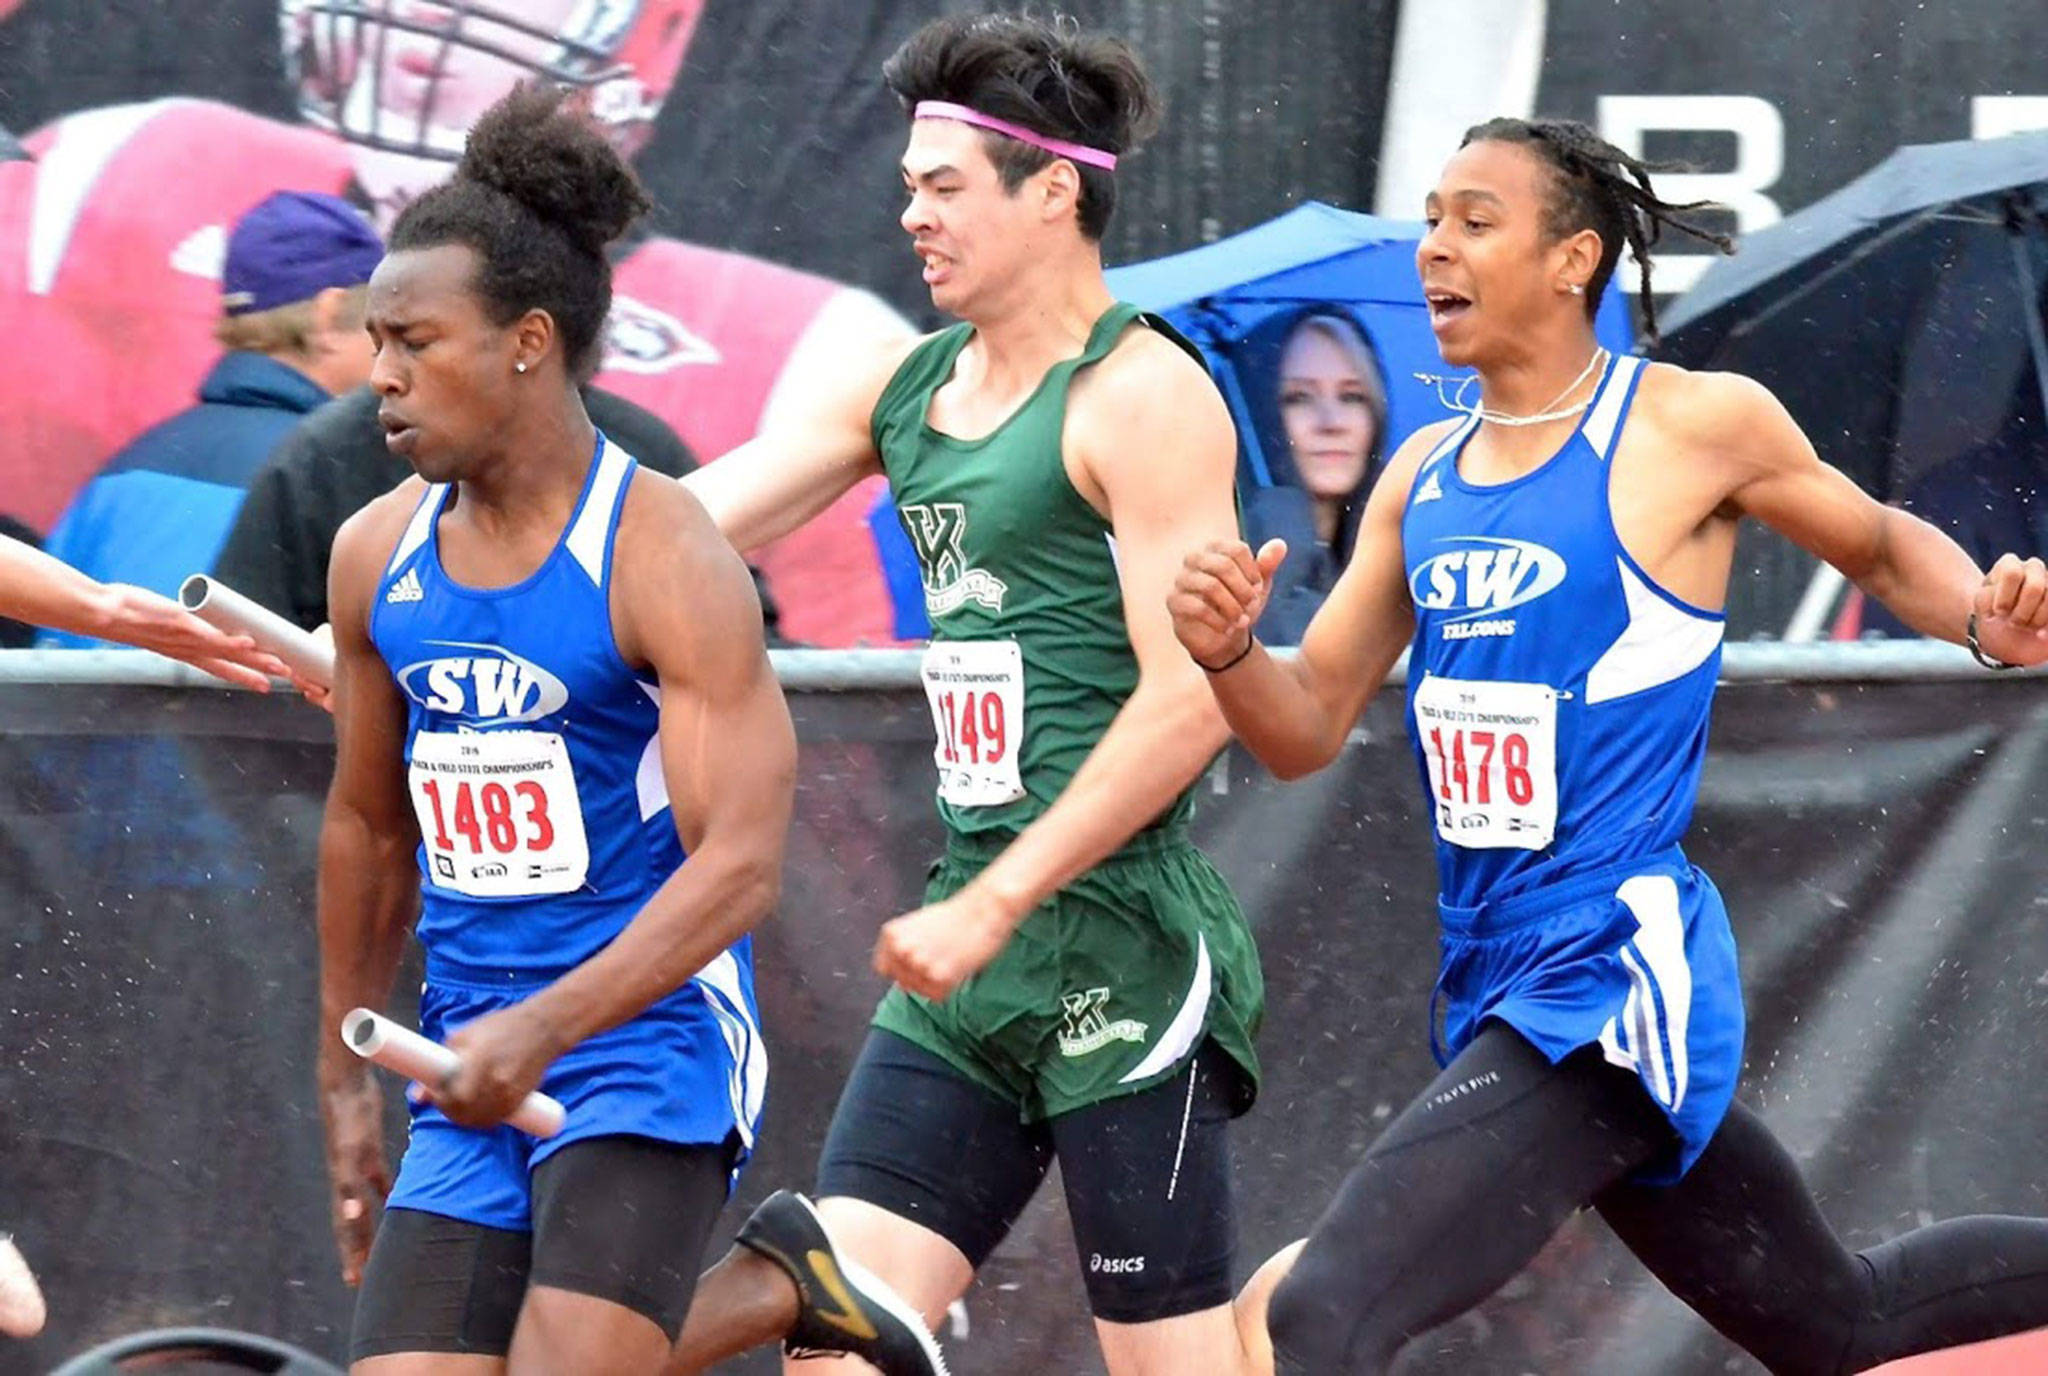 Matthew Simmons, left, takes off after receiving the baton from Issiah Gonzales.(Photo by Karen Swegler)